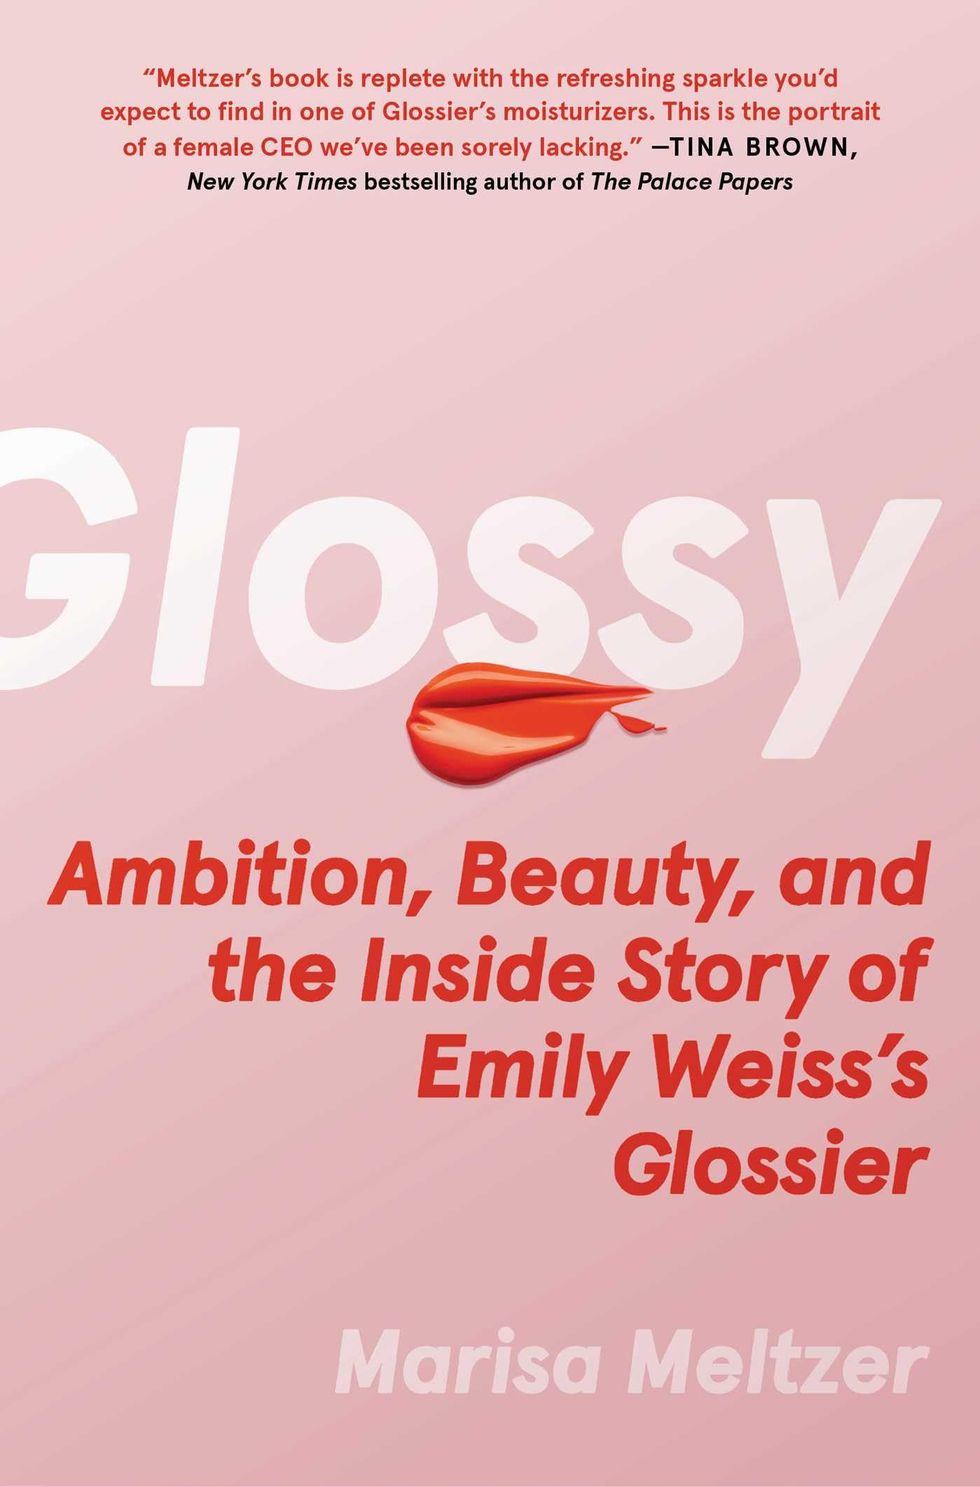 Glossy: Ambition, Beauty and the Inside Story of Glossier by Emily Weiss